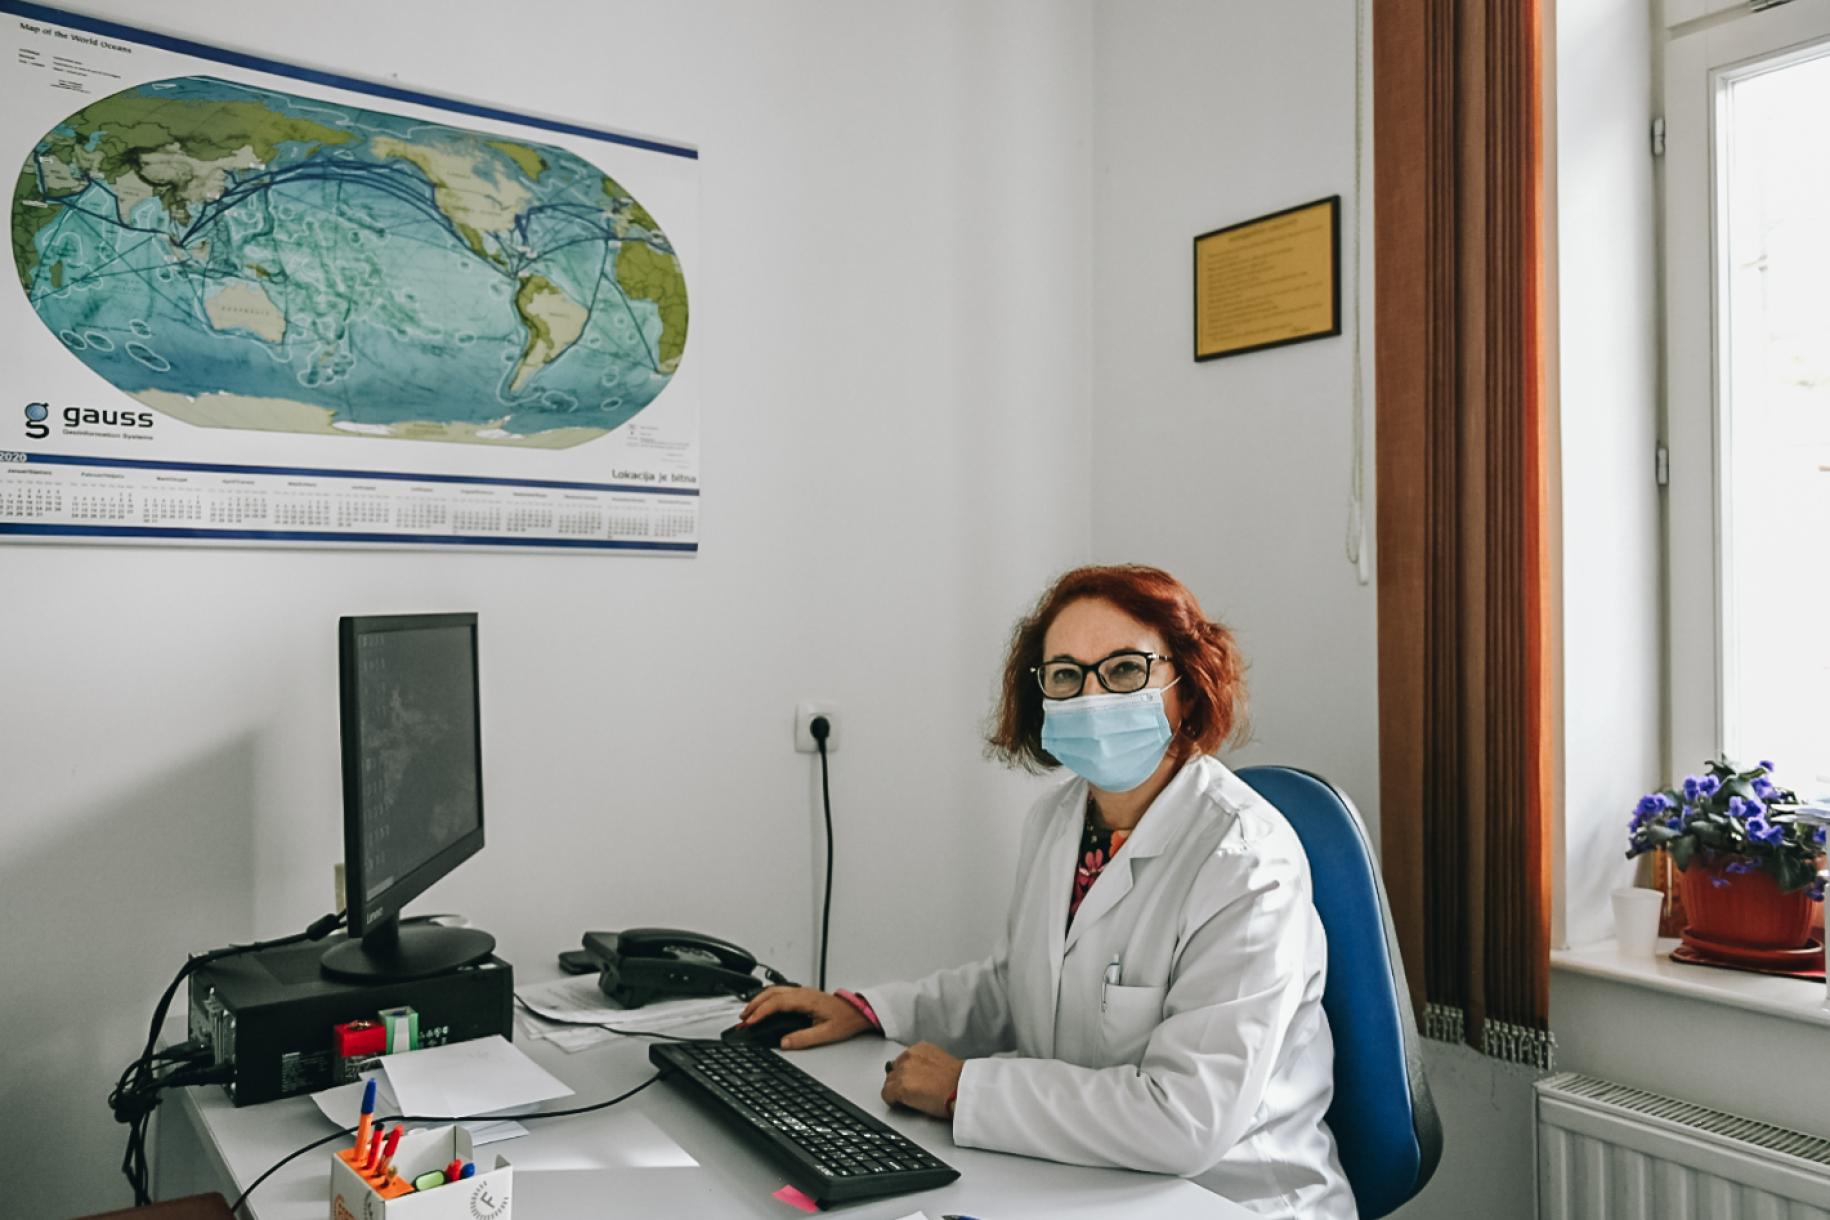 Dr. Snežana sitting at her desk with a poster of a world map just above her desk.